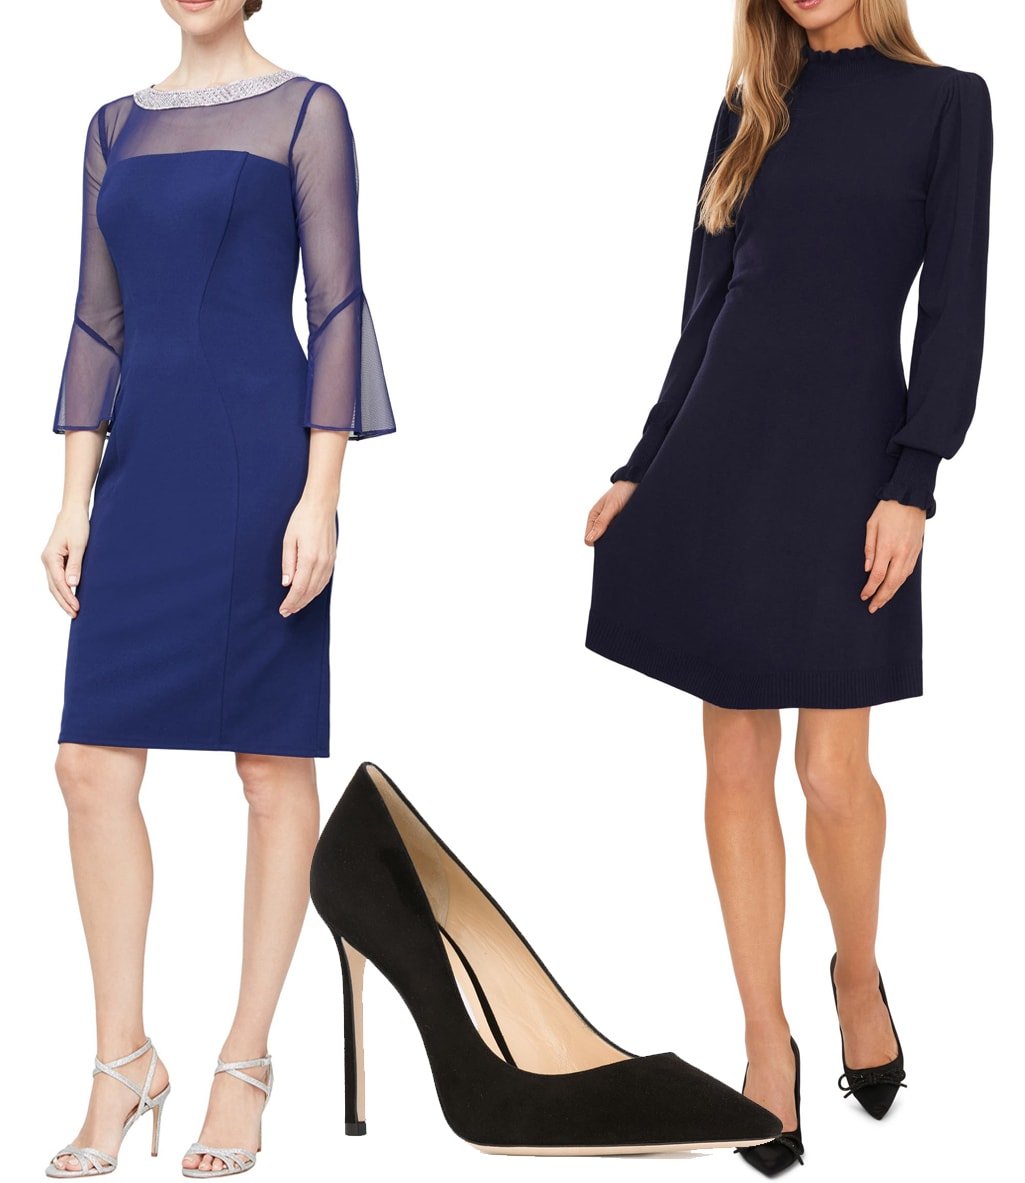 black shoes and navy dress